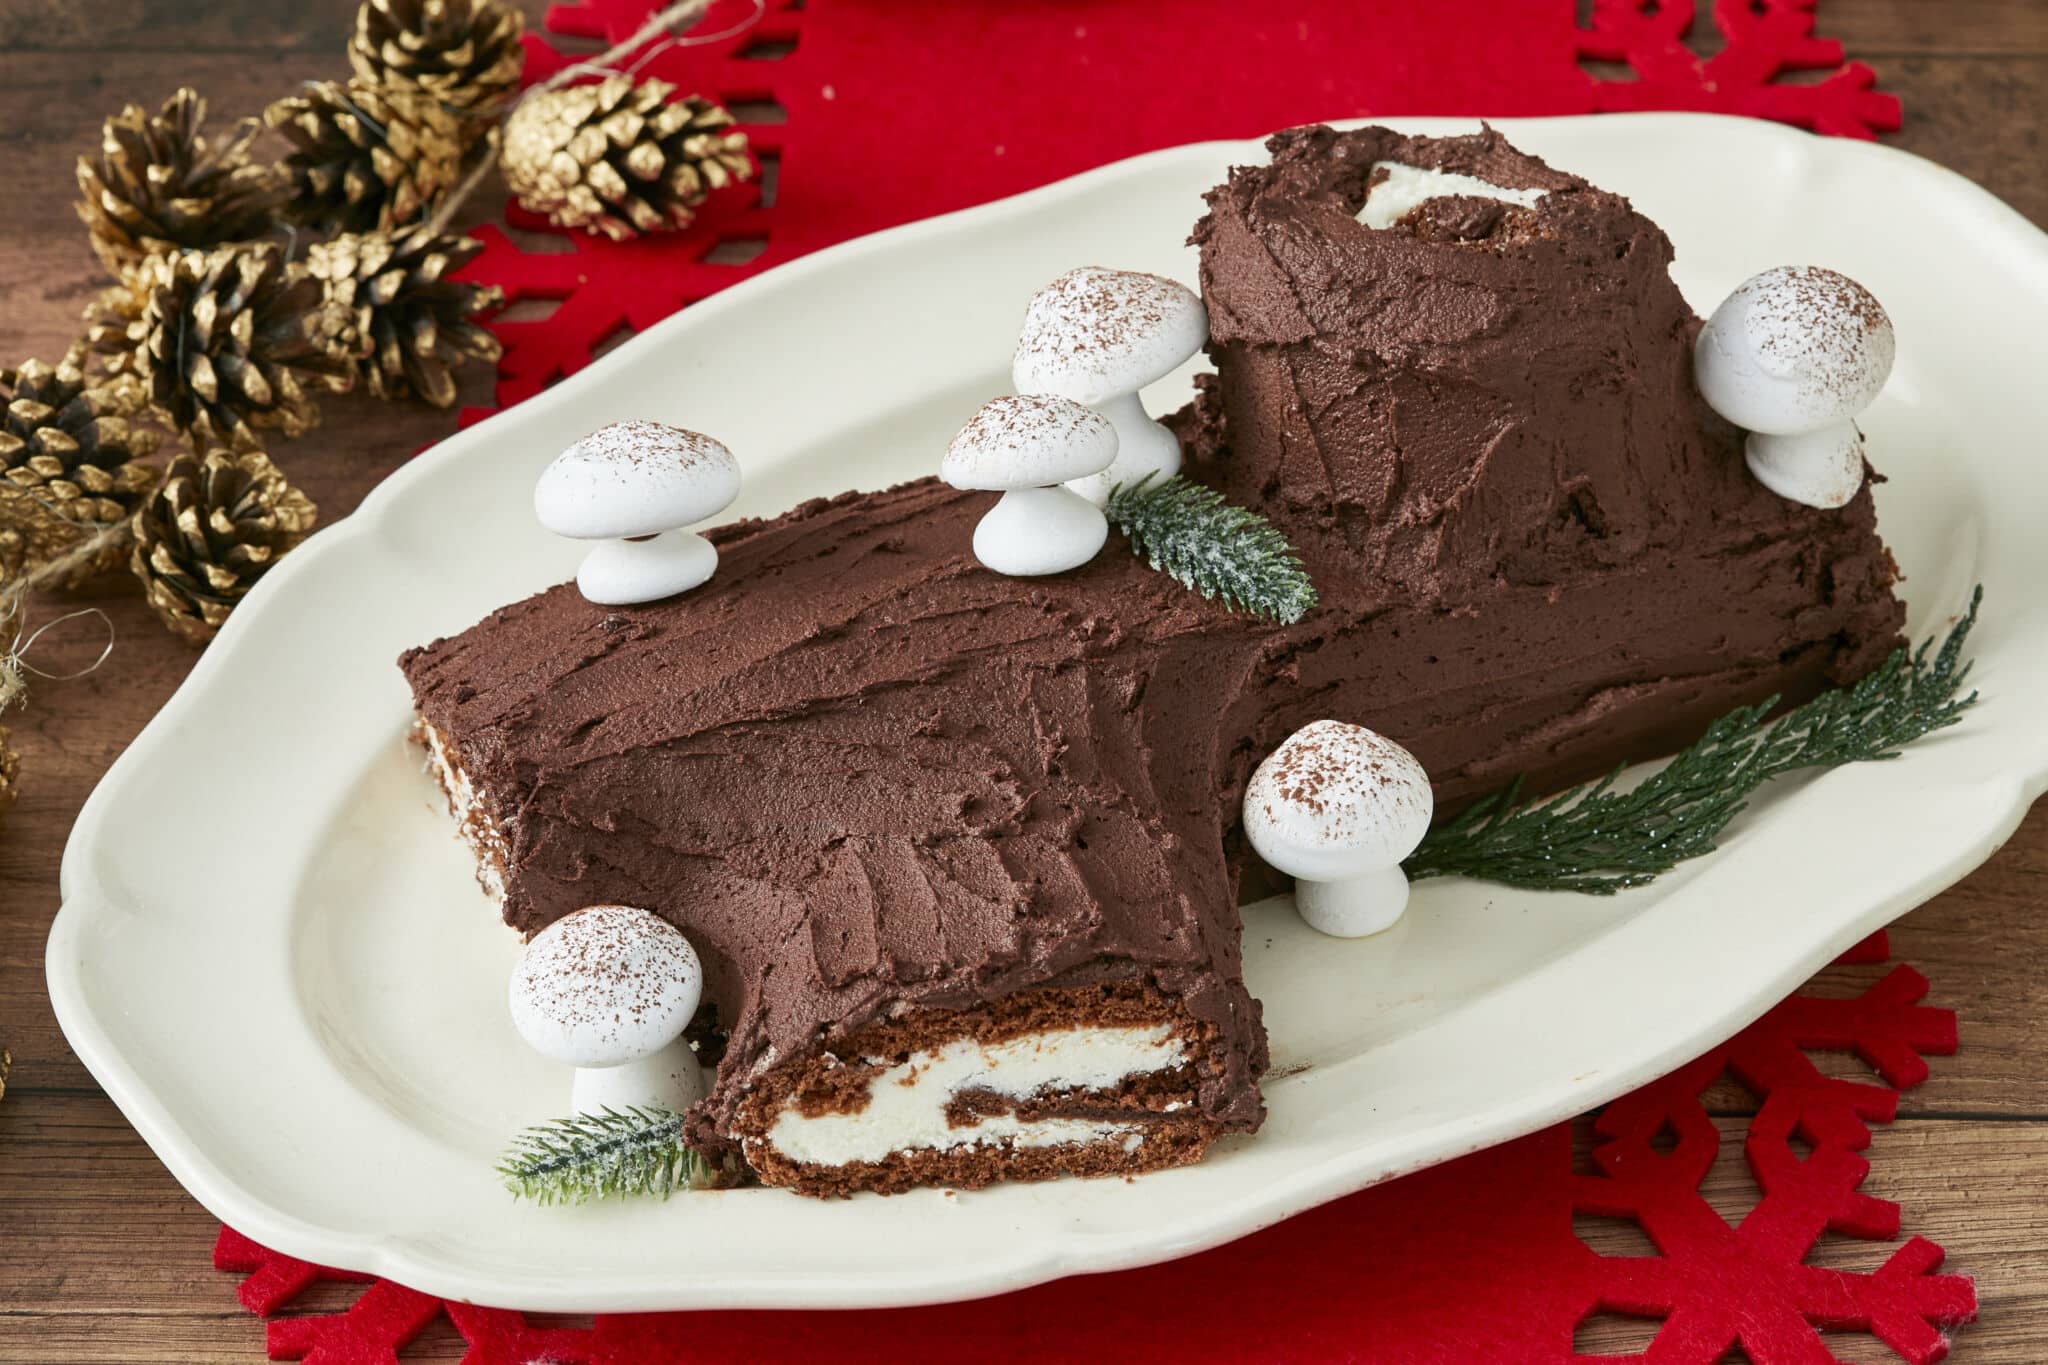 Christmas Yule Log (Bûche de Noël) is served on a big white platter. It's a chocolate sponge cake roll filled with vanilla buttercream, frosted with chocolate buttercream, and decorated with meringue mushrooms to look like a rustic yule log.